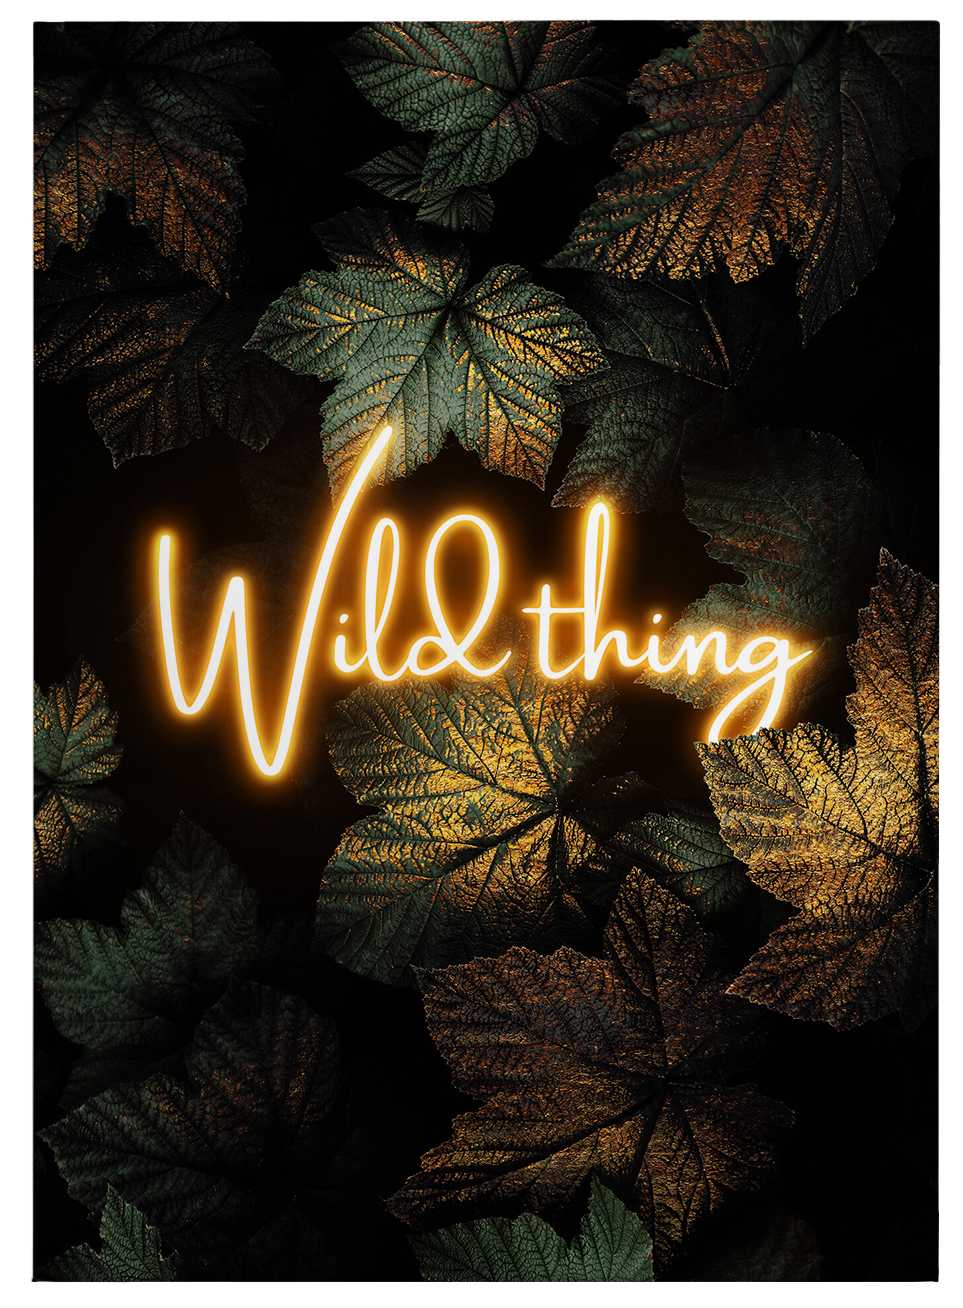             Canvas print "Wild Thing" by Fredriksson – colourful
        